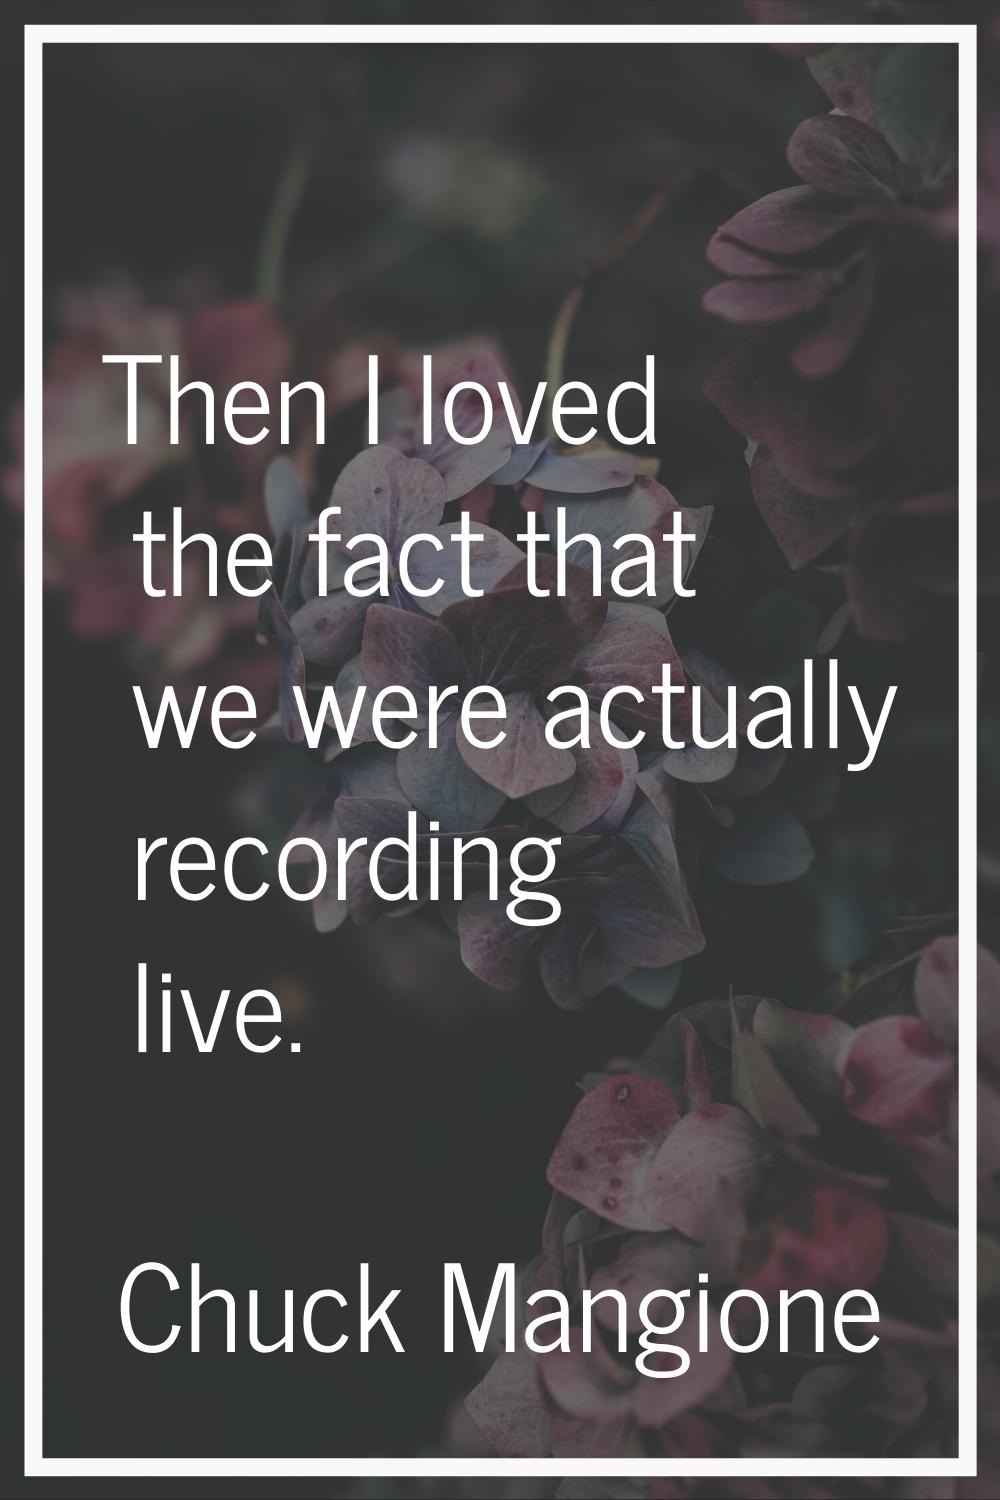 Then I loved the fact that we were actually recording live.